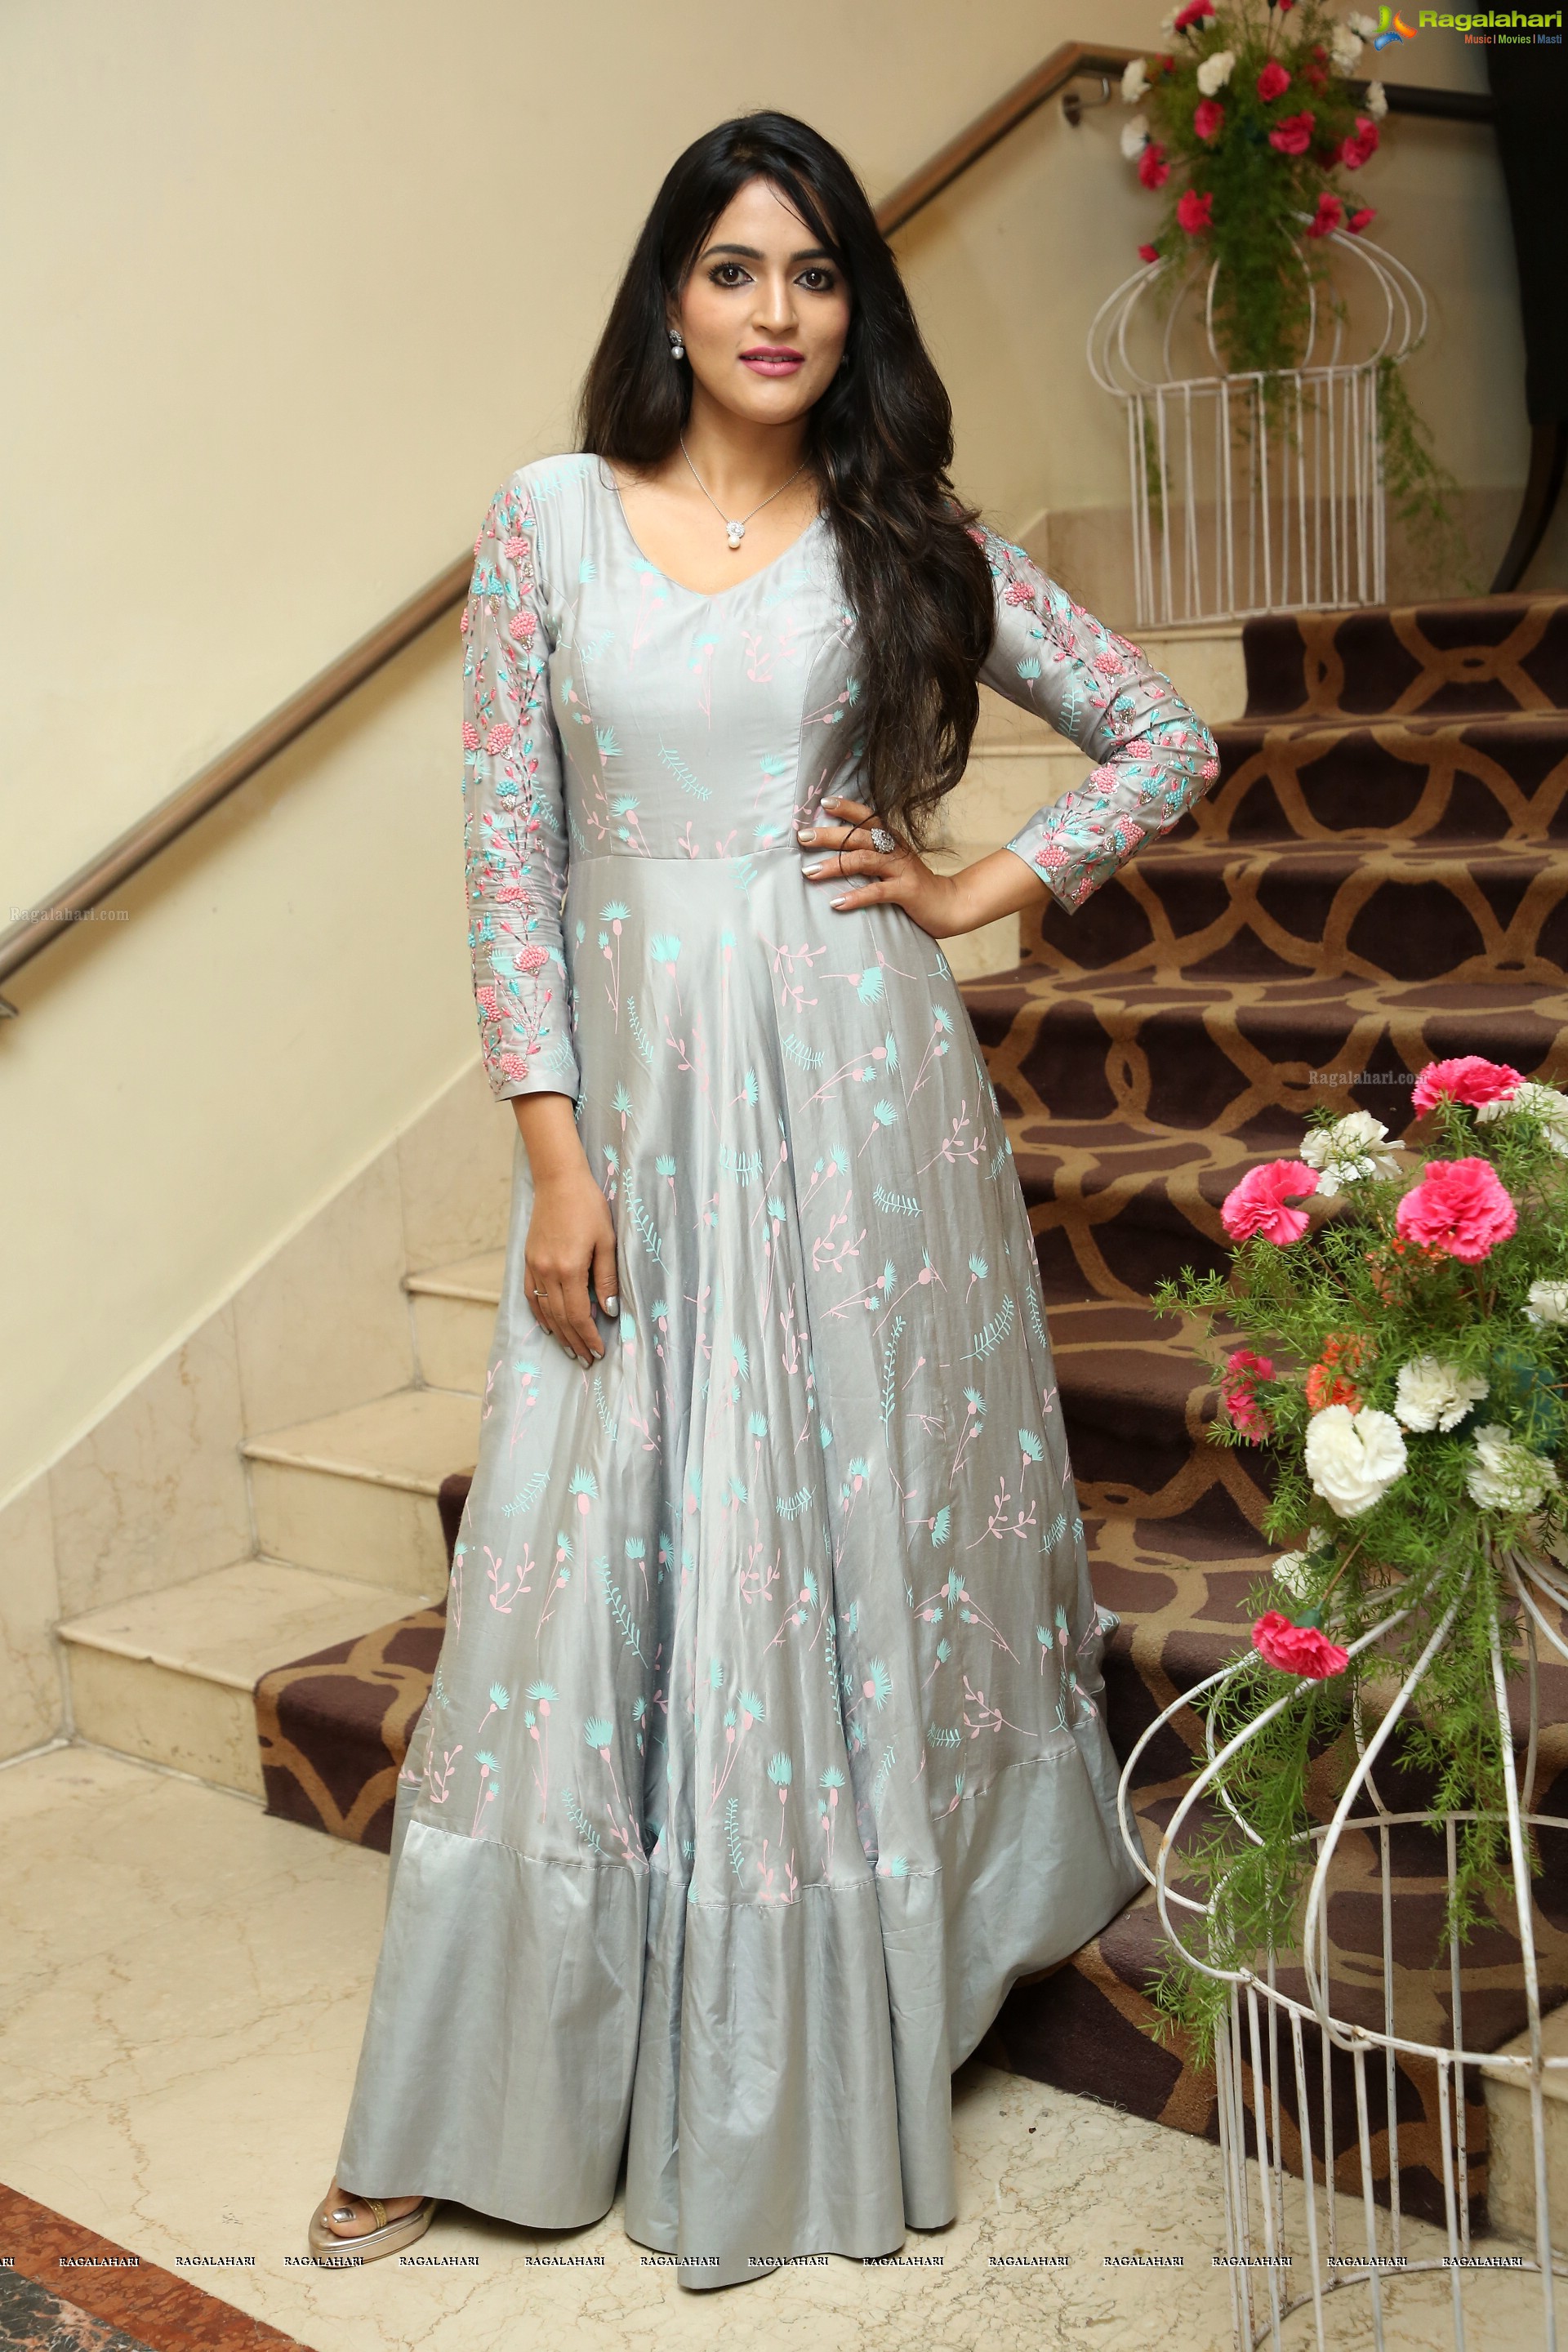 Sukrutha Wagle @ The Haat Fashion & Lifestyle Expo - HD Gallery